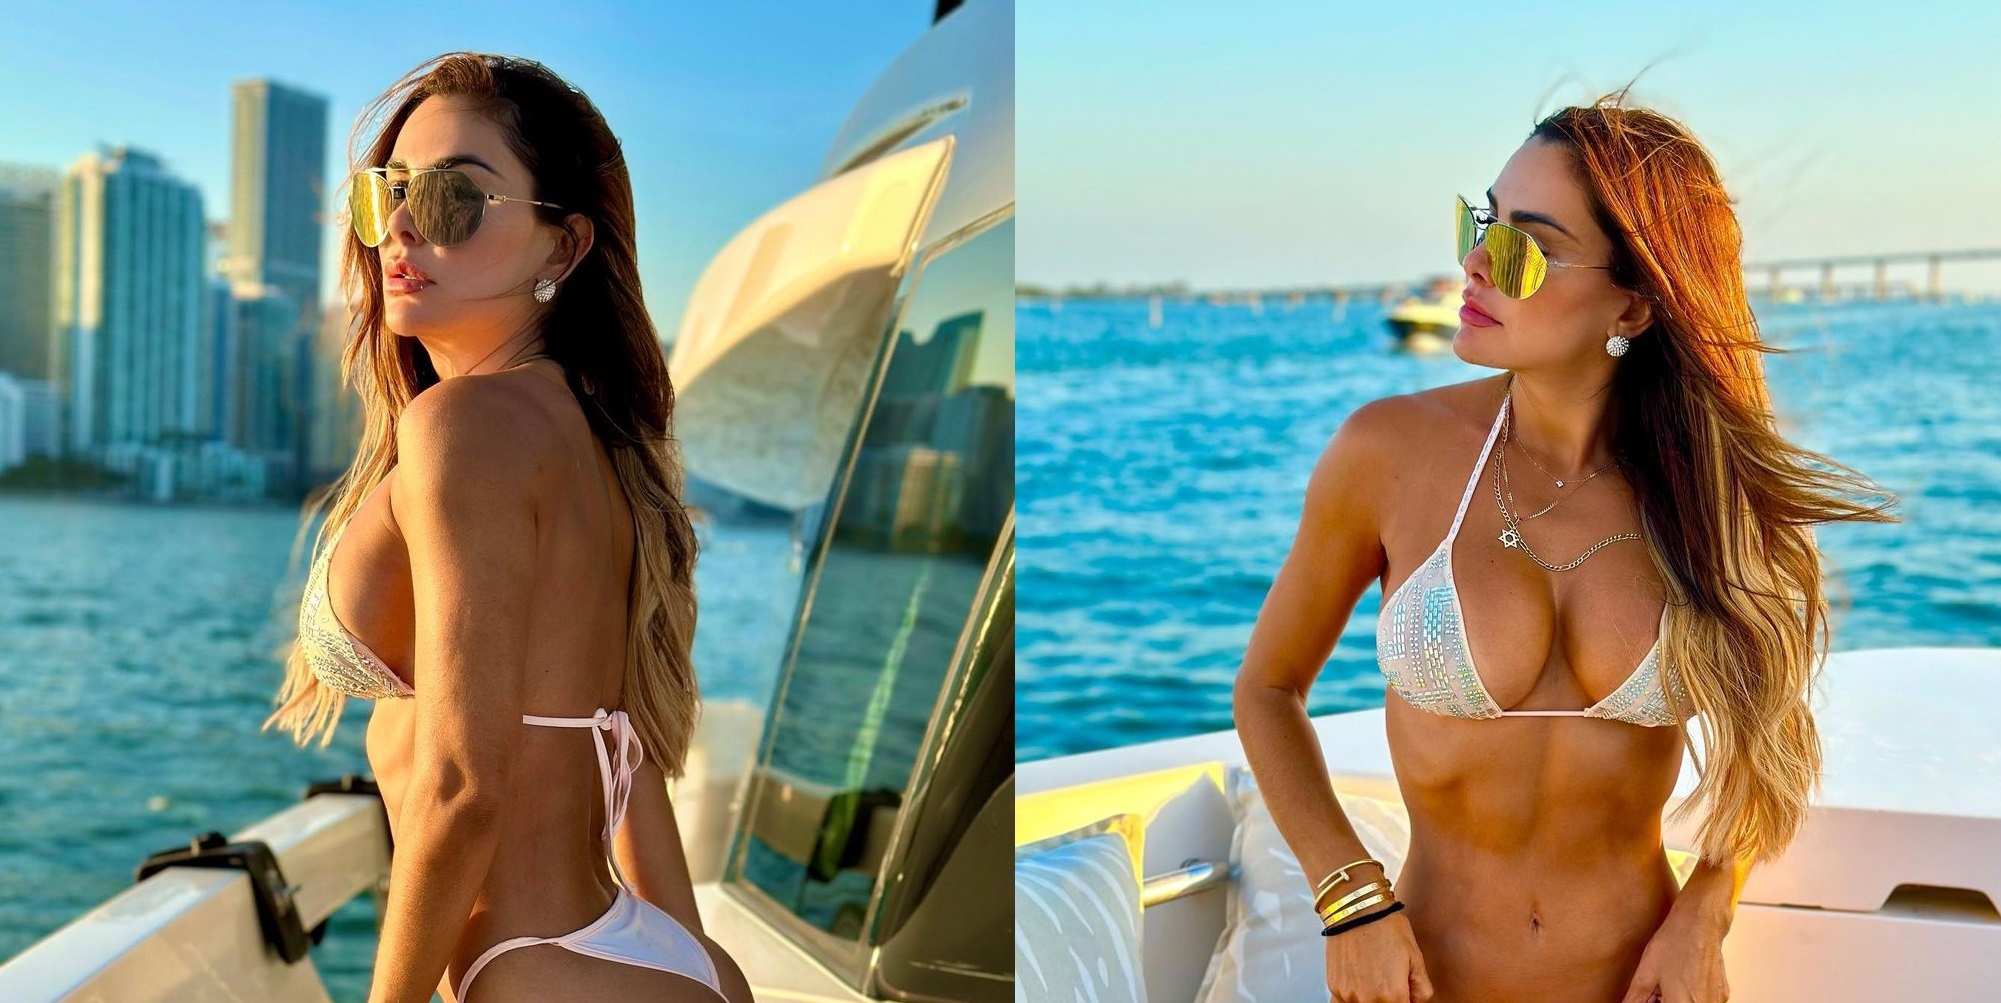 Ninel Conde shows off her tan in a string microbikini when posing on board a yacht